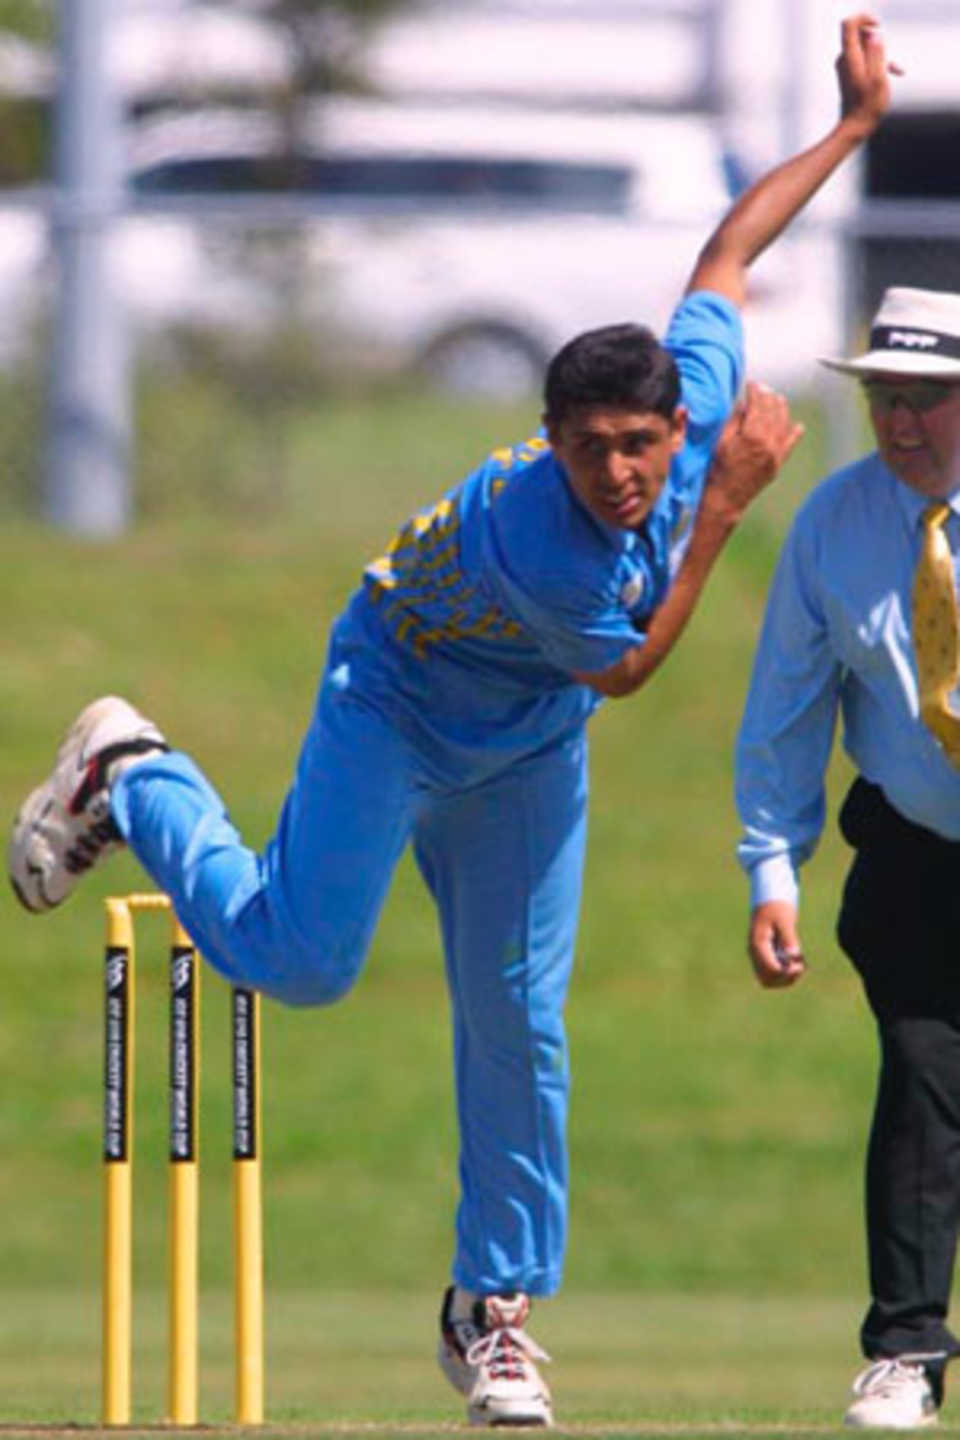 India Under-19 bowler Maninder Bisla delivers a ball during his spell of 1-23 from 10 overs as umpire Ian Shine looks on. ICC Under-19 World Cup Group A: India Under-19s v South Africa Under-19s at North Harbour Stadium, Auckland, 23 January 2002.